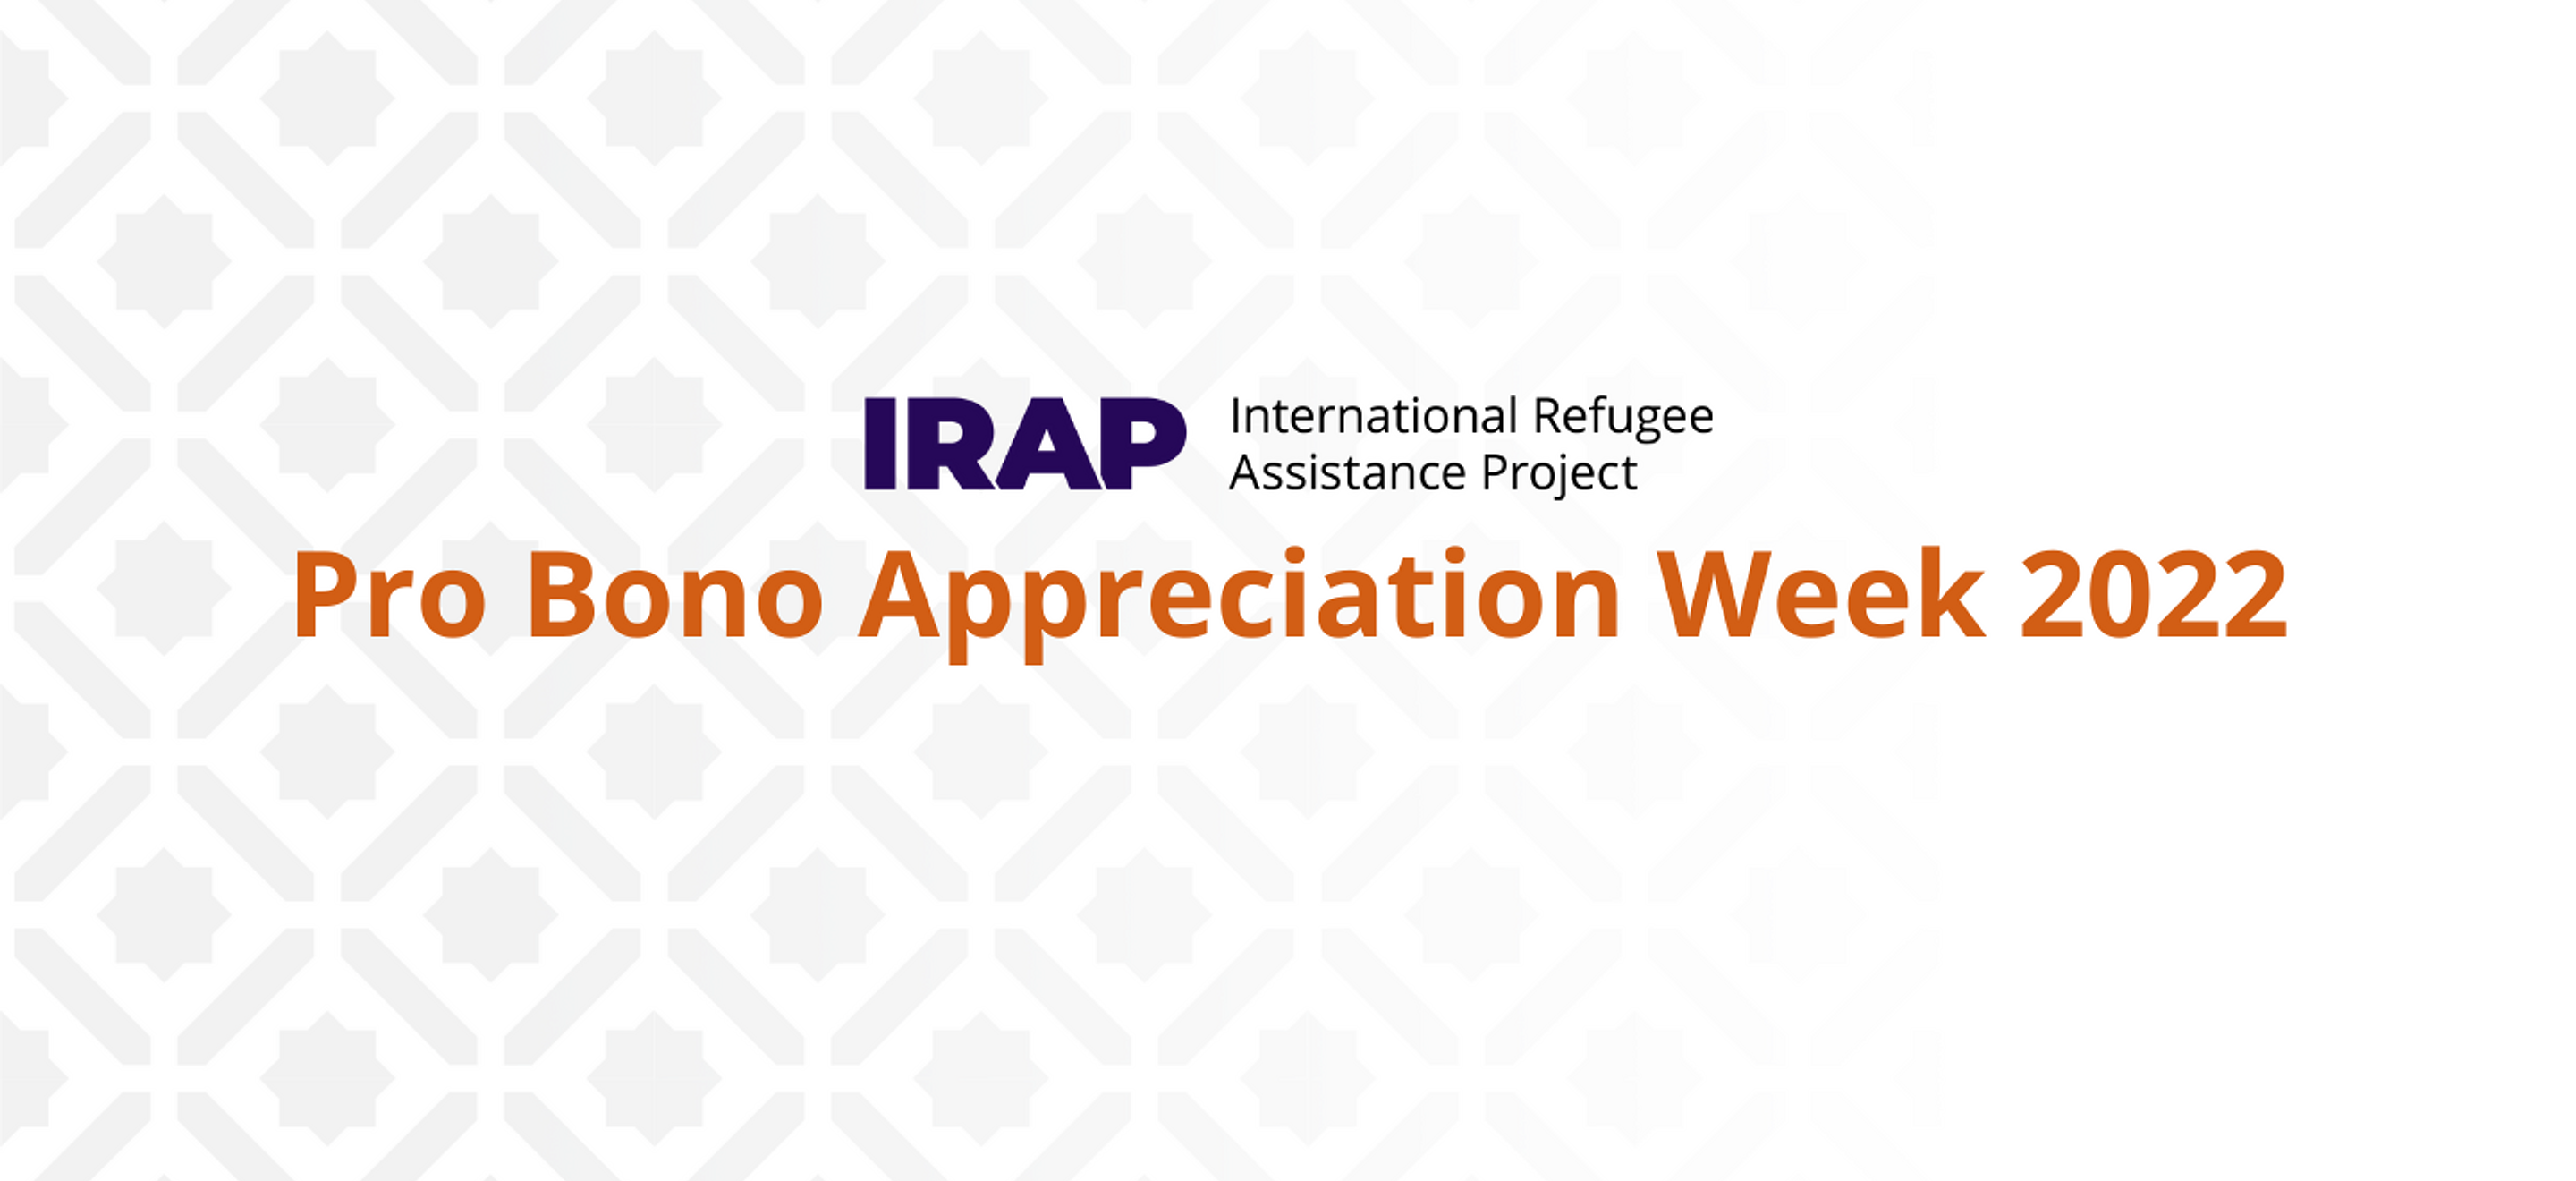 A graphic with the text "Pro Bono Appreciation Week 2022" with the IRAP logo